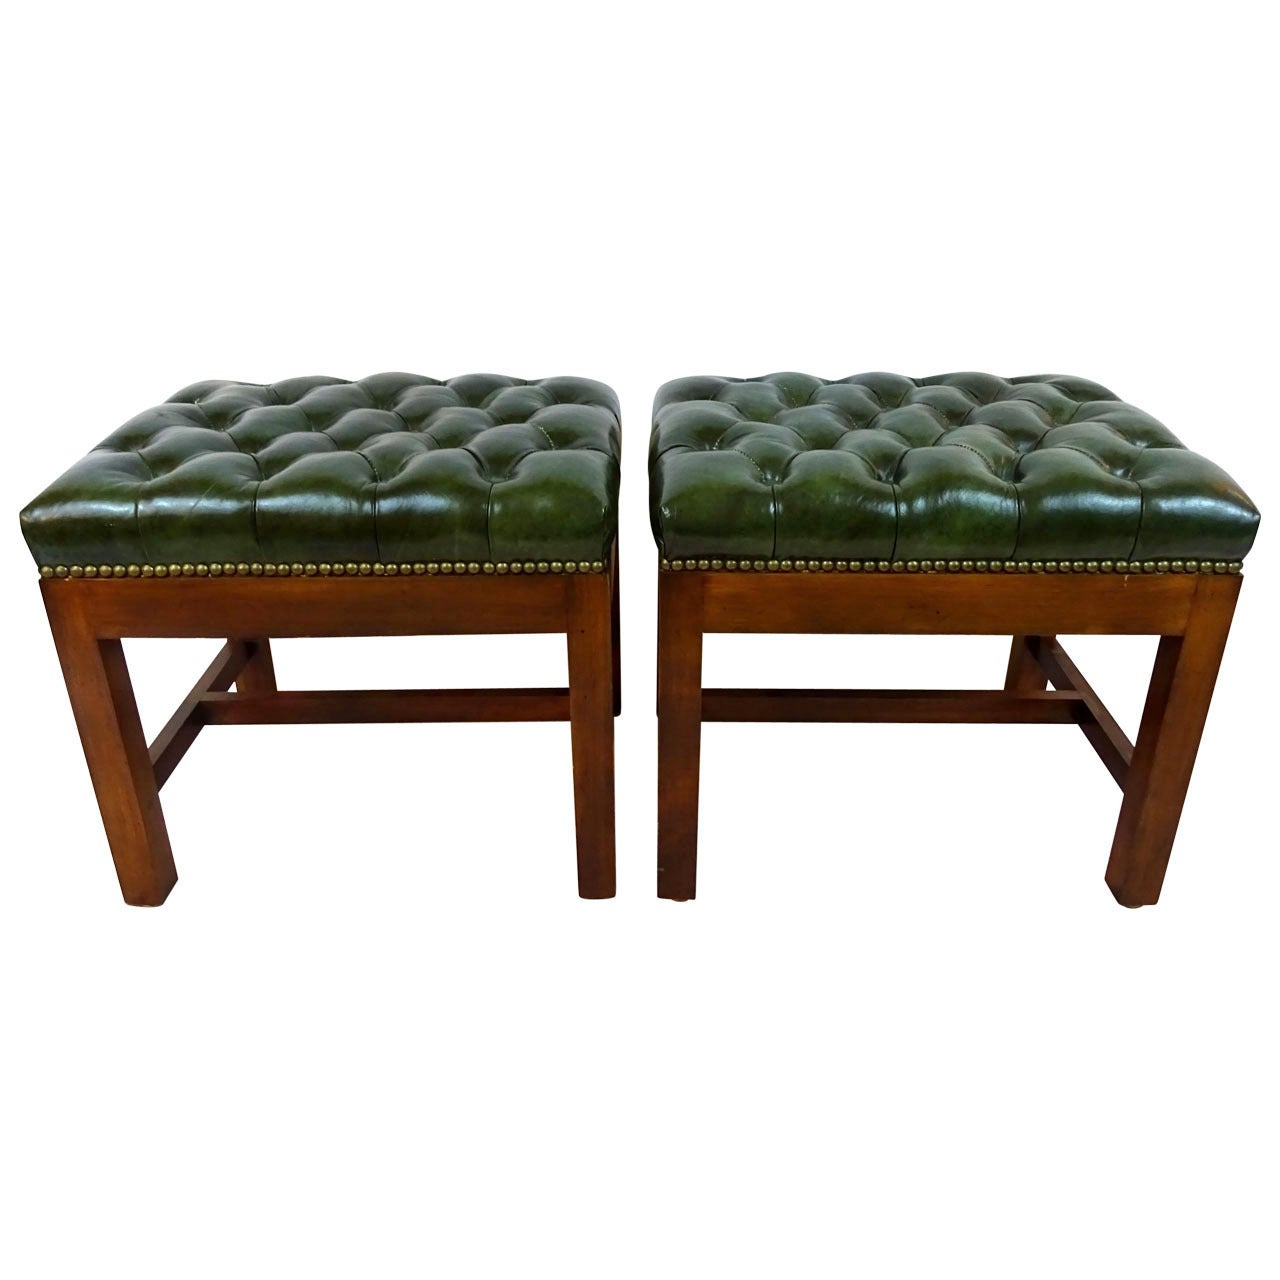 Pair of 20th Century Stools Upholstered in Green Tufted Leather